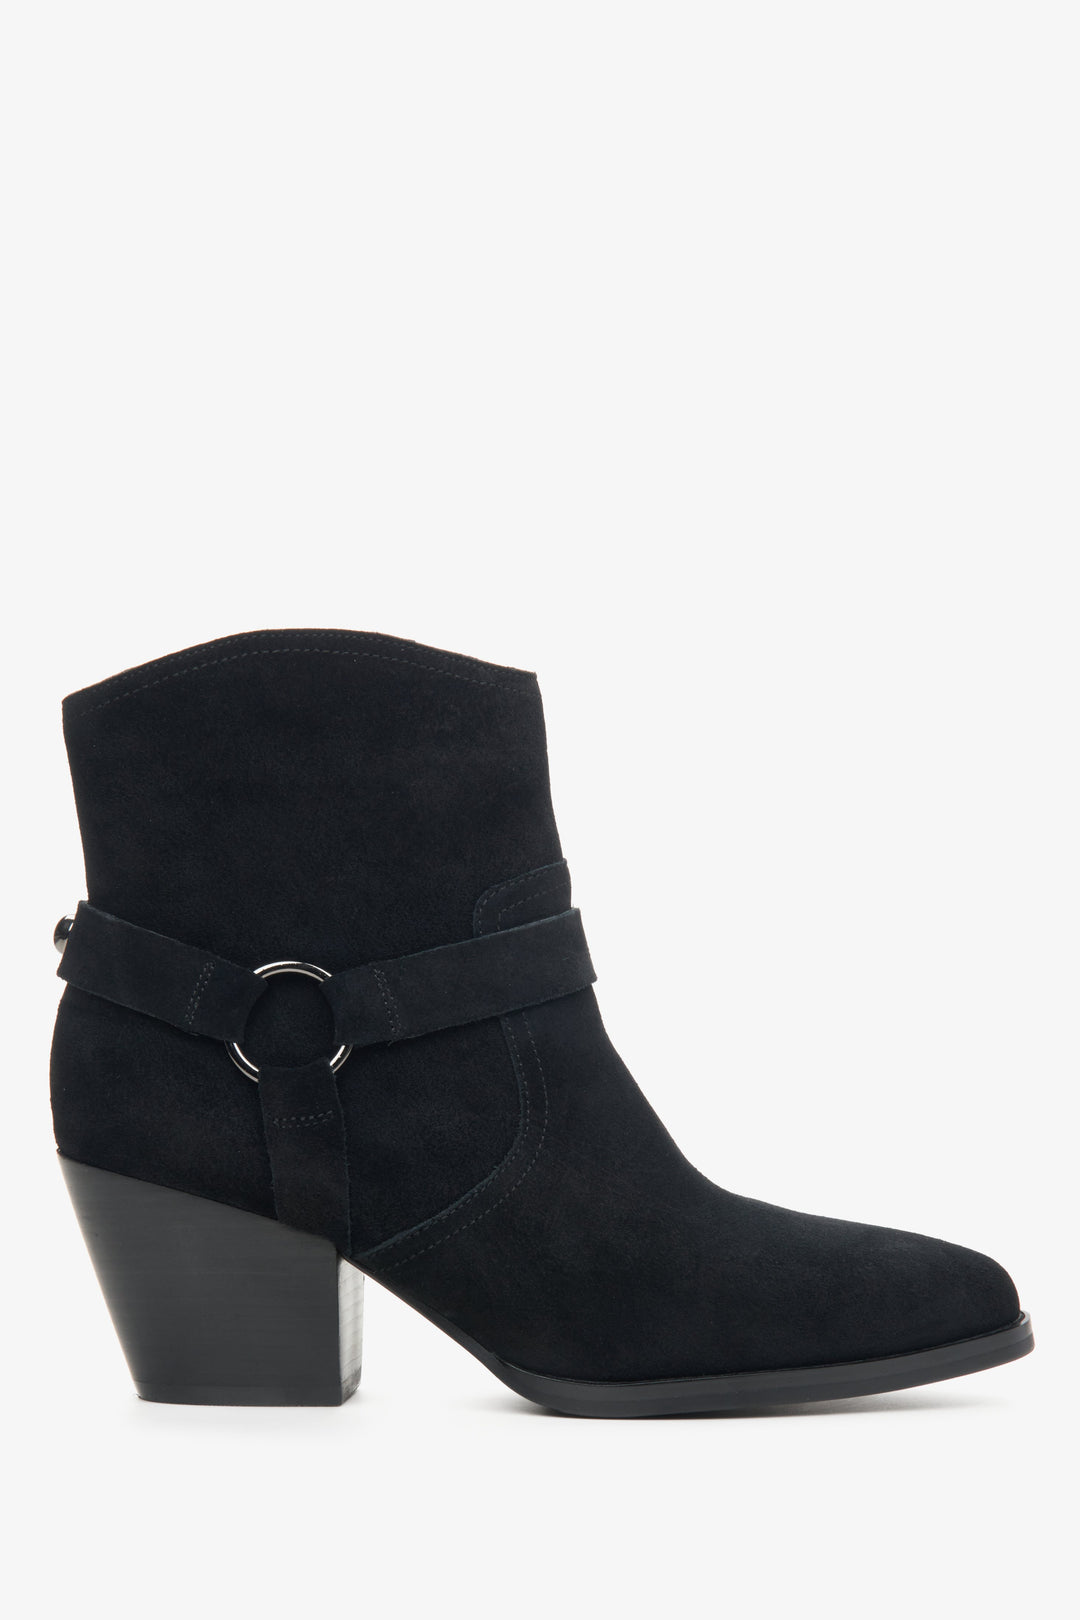 Women's Low-Top Black Cowboy Boots made of Genuine Suede with Decorative Strap Estro ER00113870.